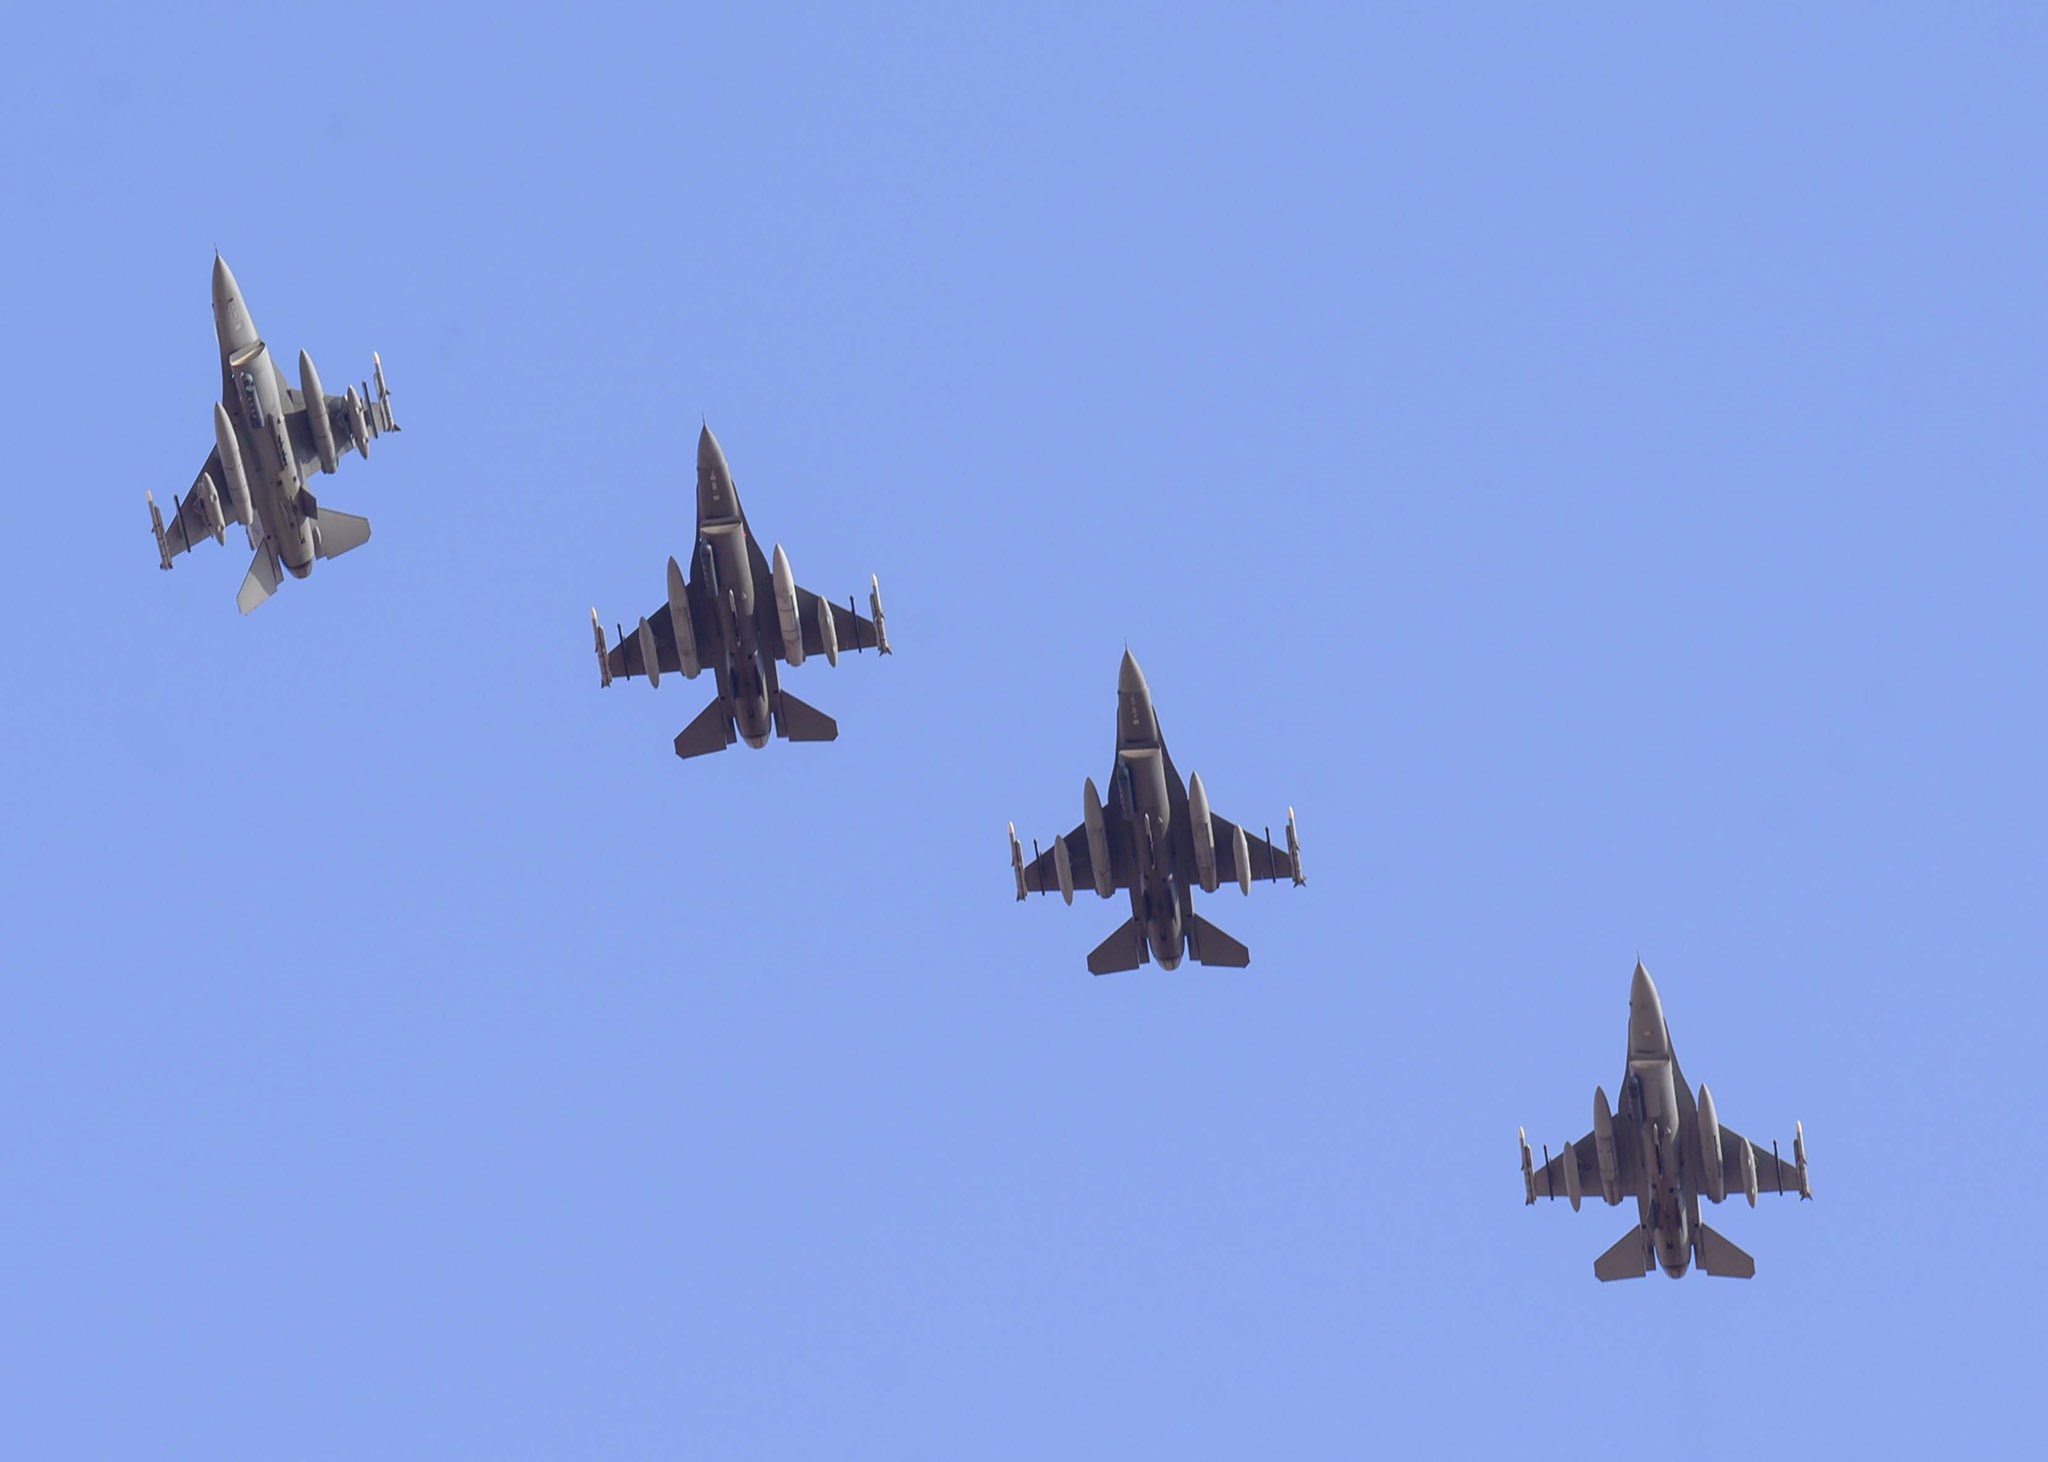 US District of Columbia Air National Guard F-16 Fighters Arrive in Kingdom of Saudi Arabia